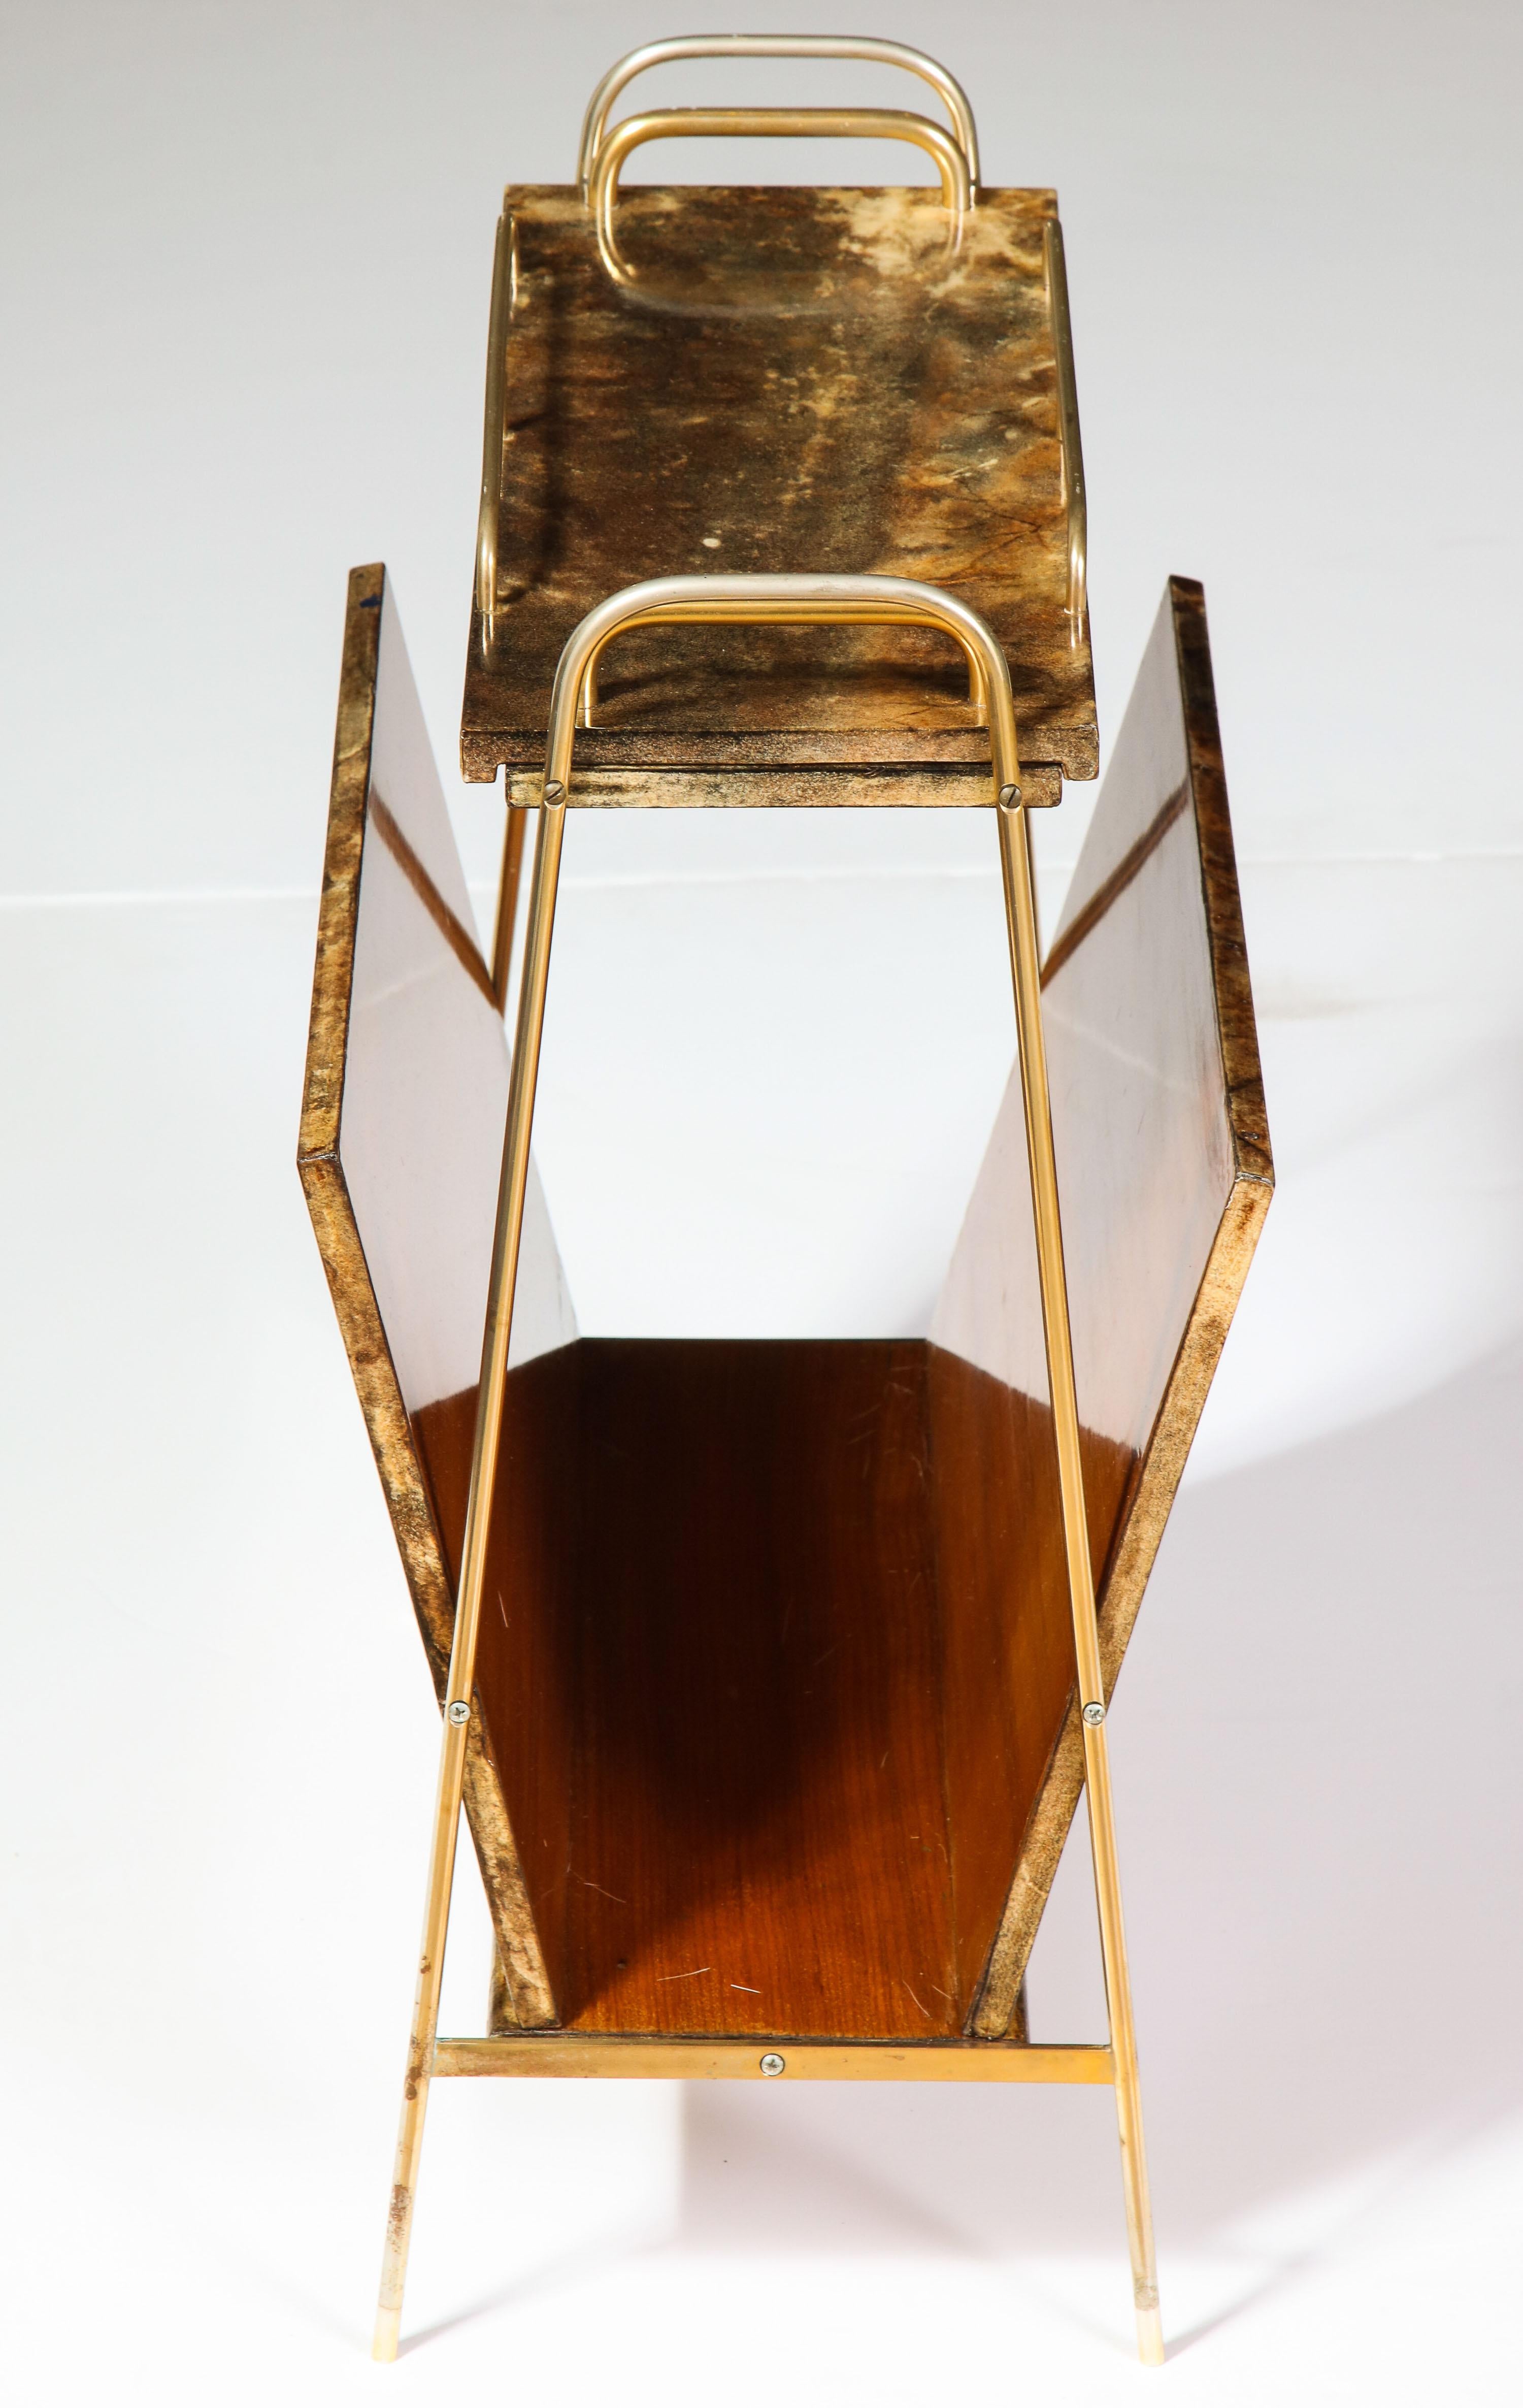 Magazine Stand by Aldo Tura, Goat Skin Parchment, Midcentury Italian, C 1950 For Sale 1